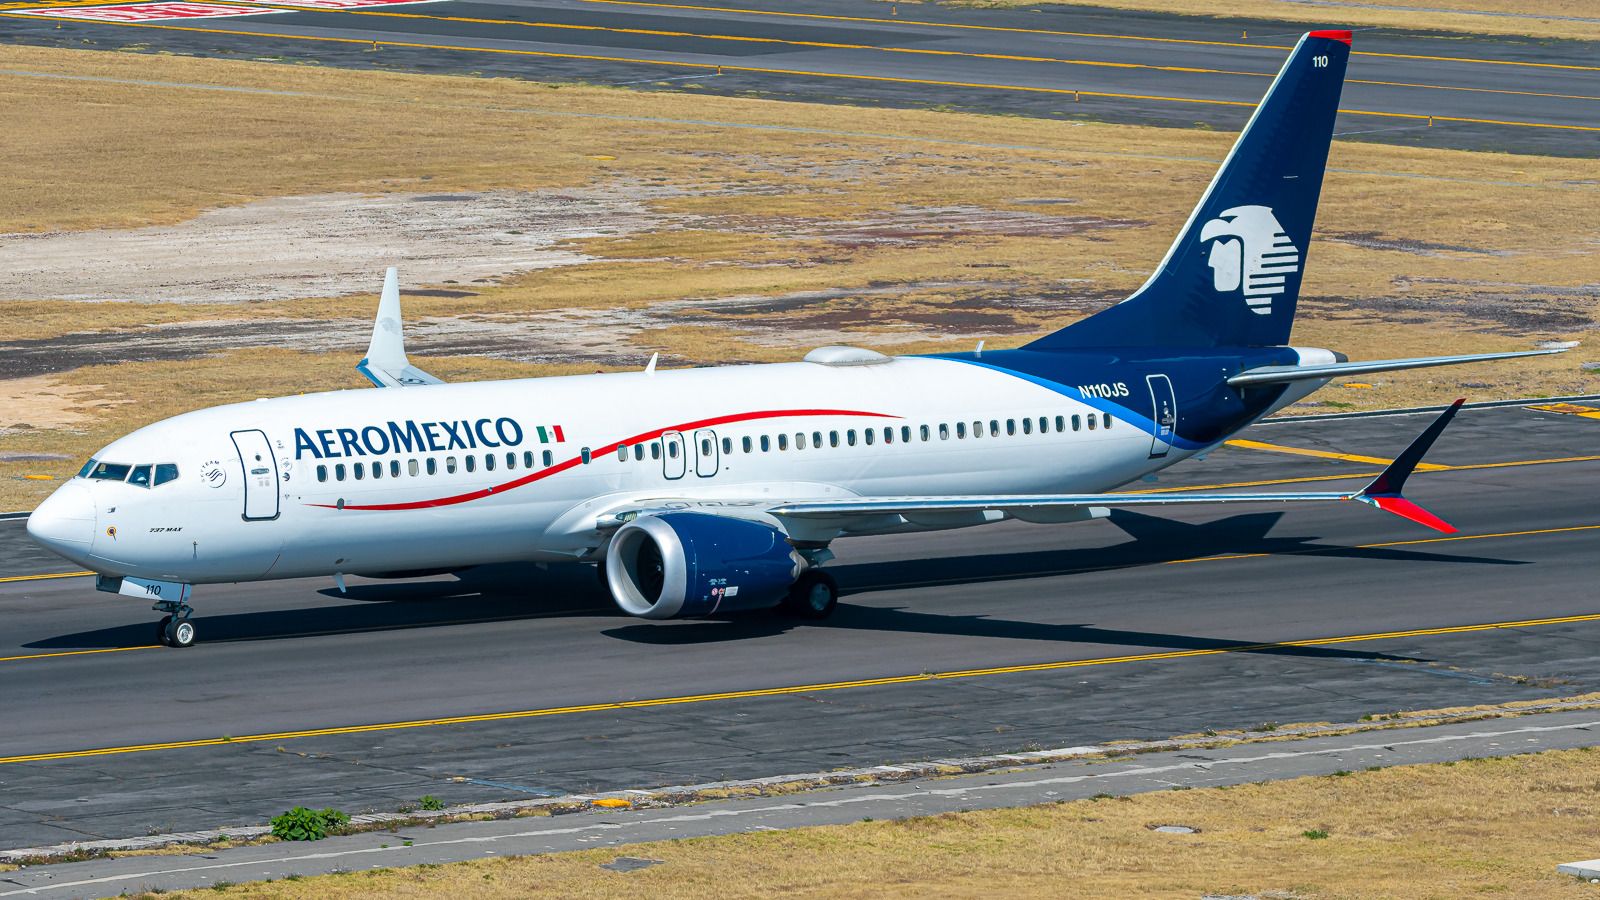 An Aeromexico Boeing 737 MAX 8 aircraft on a runway.